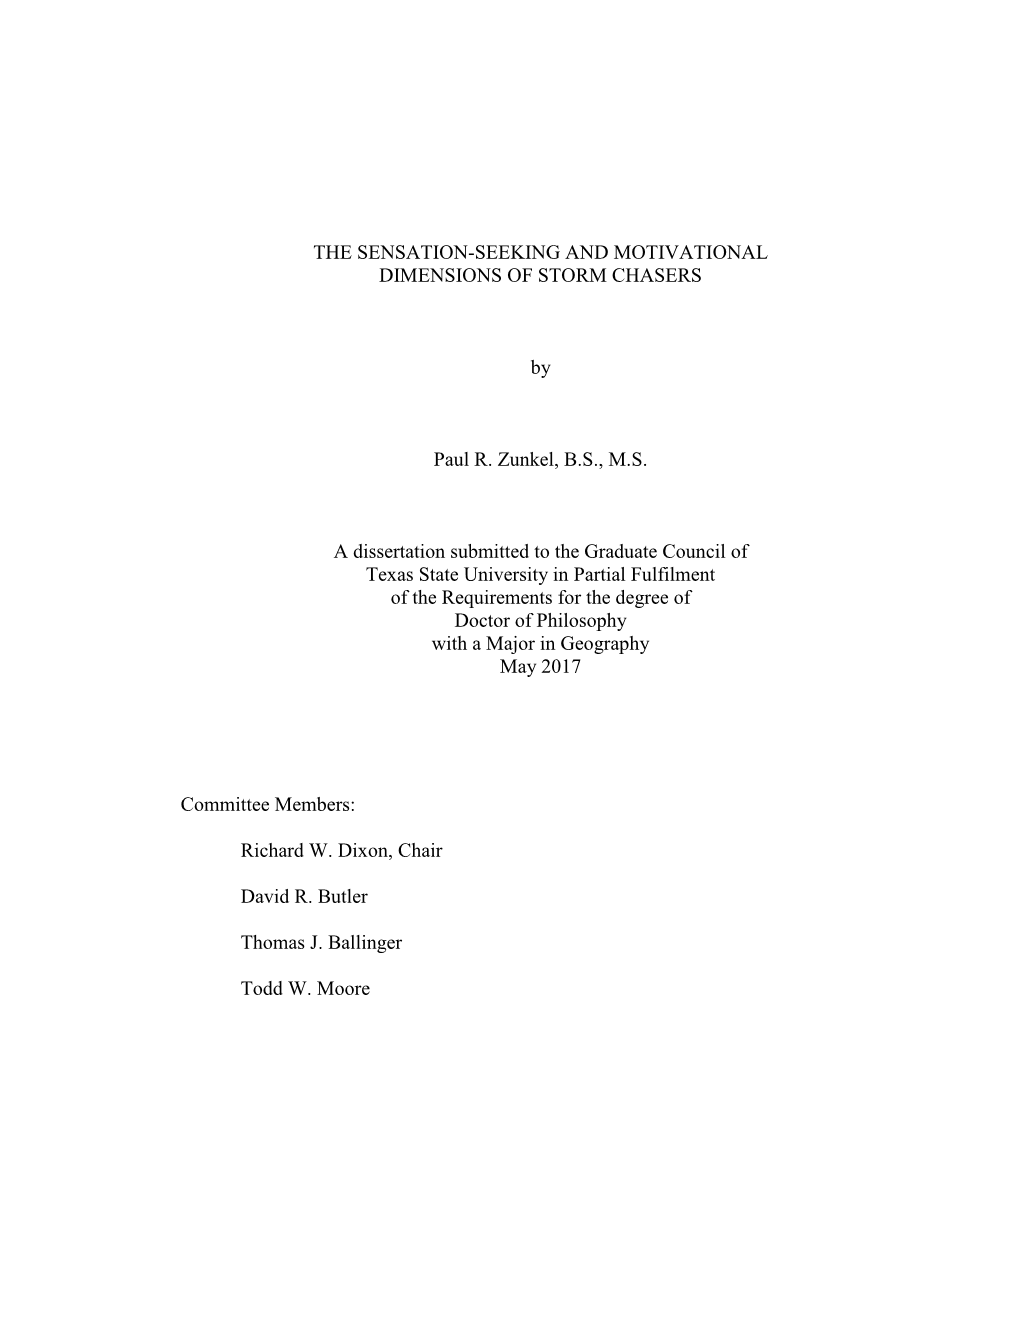 THE SENSATION-SEEKING and MOTIVATIONAL DIMENSIONS of STORM CHASERS by Paul R. Zunkel, B.S., M.S. a Dissertation Submitted to Th